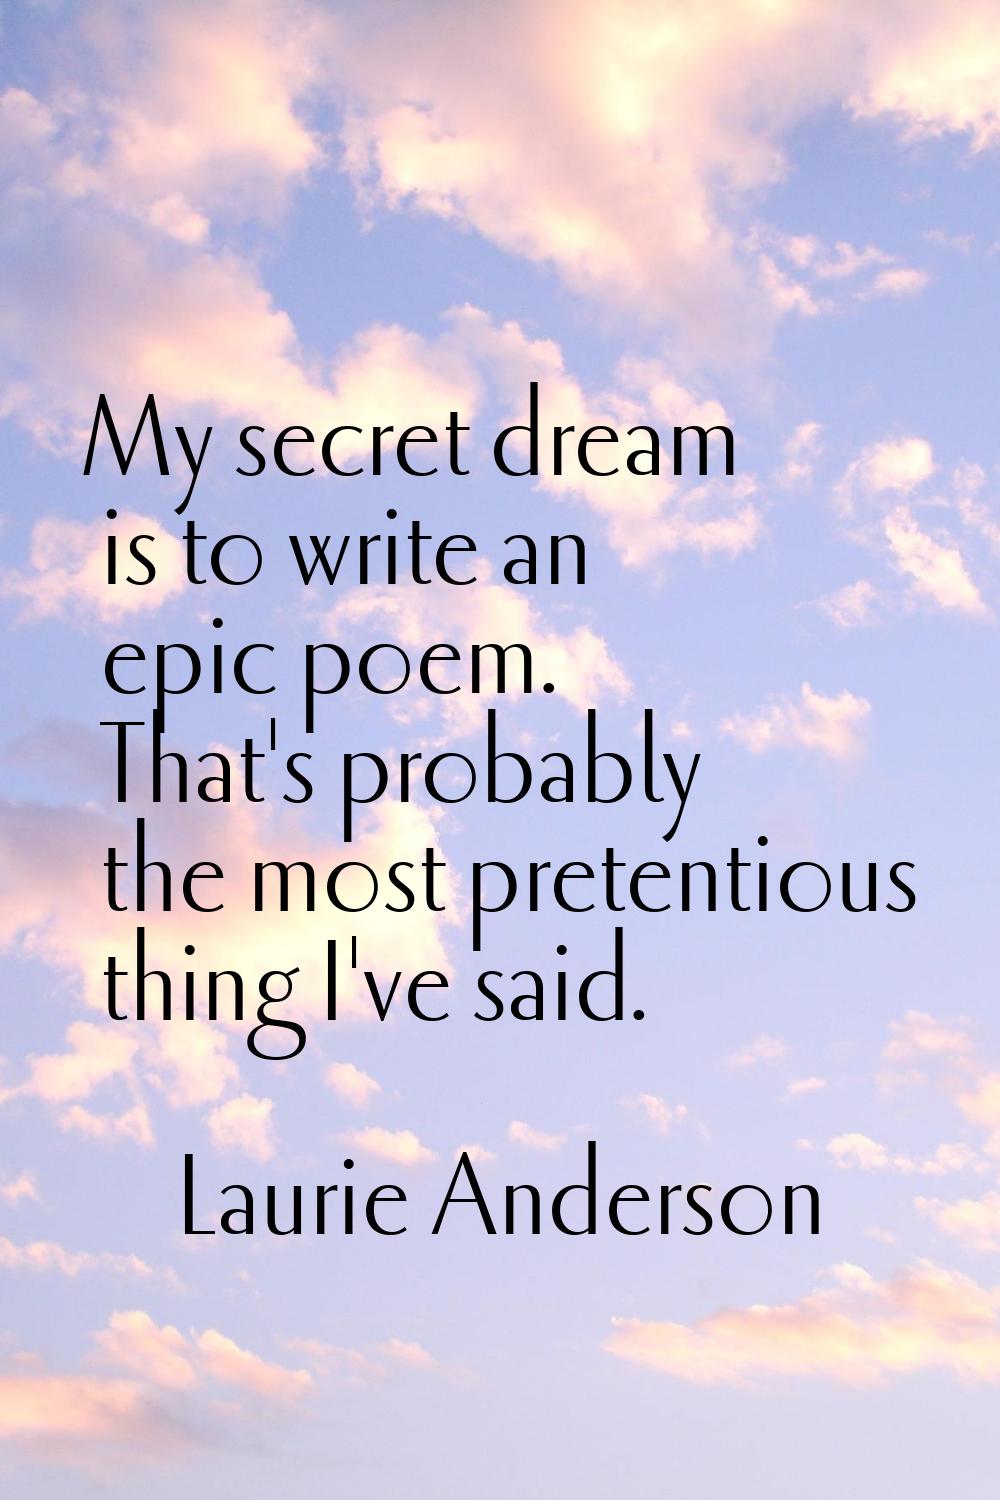 My secret dream is to write an epic poem. That's probably the most pretentious thing I've said.